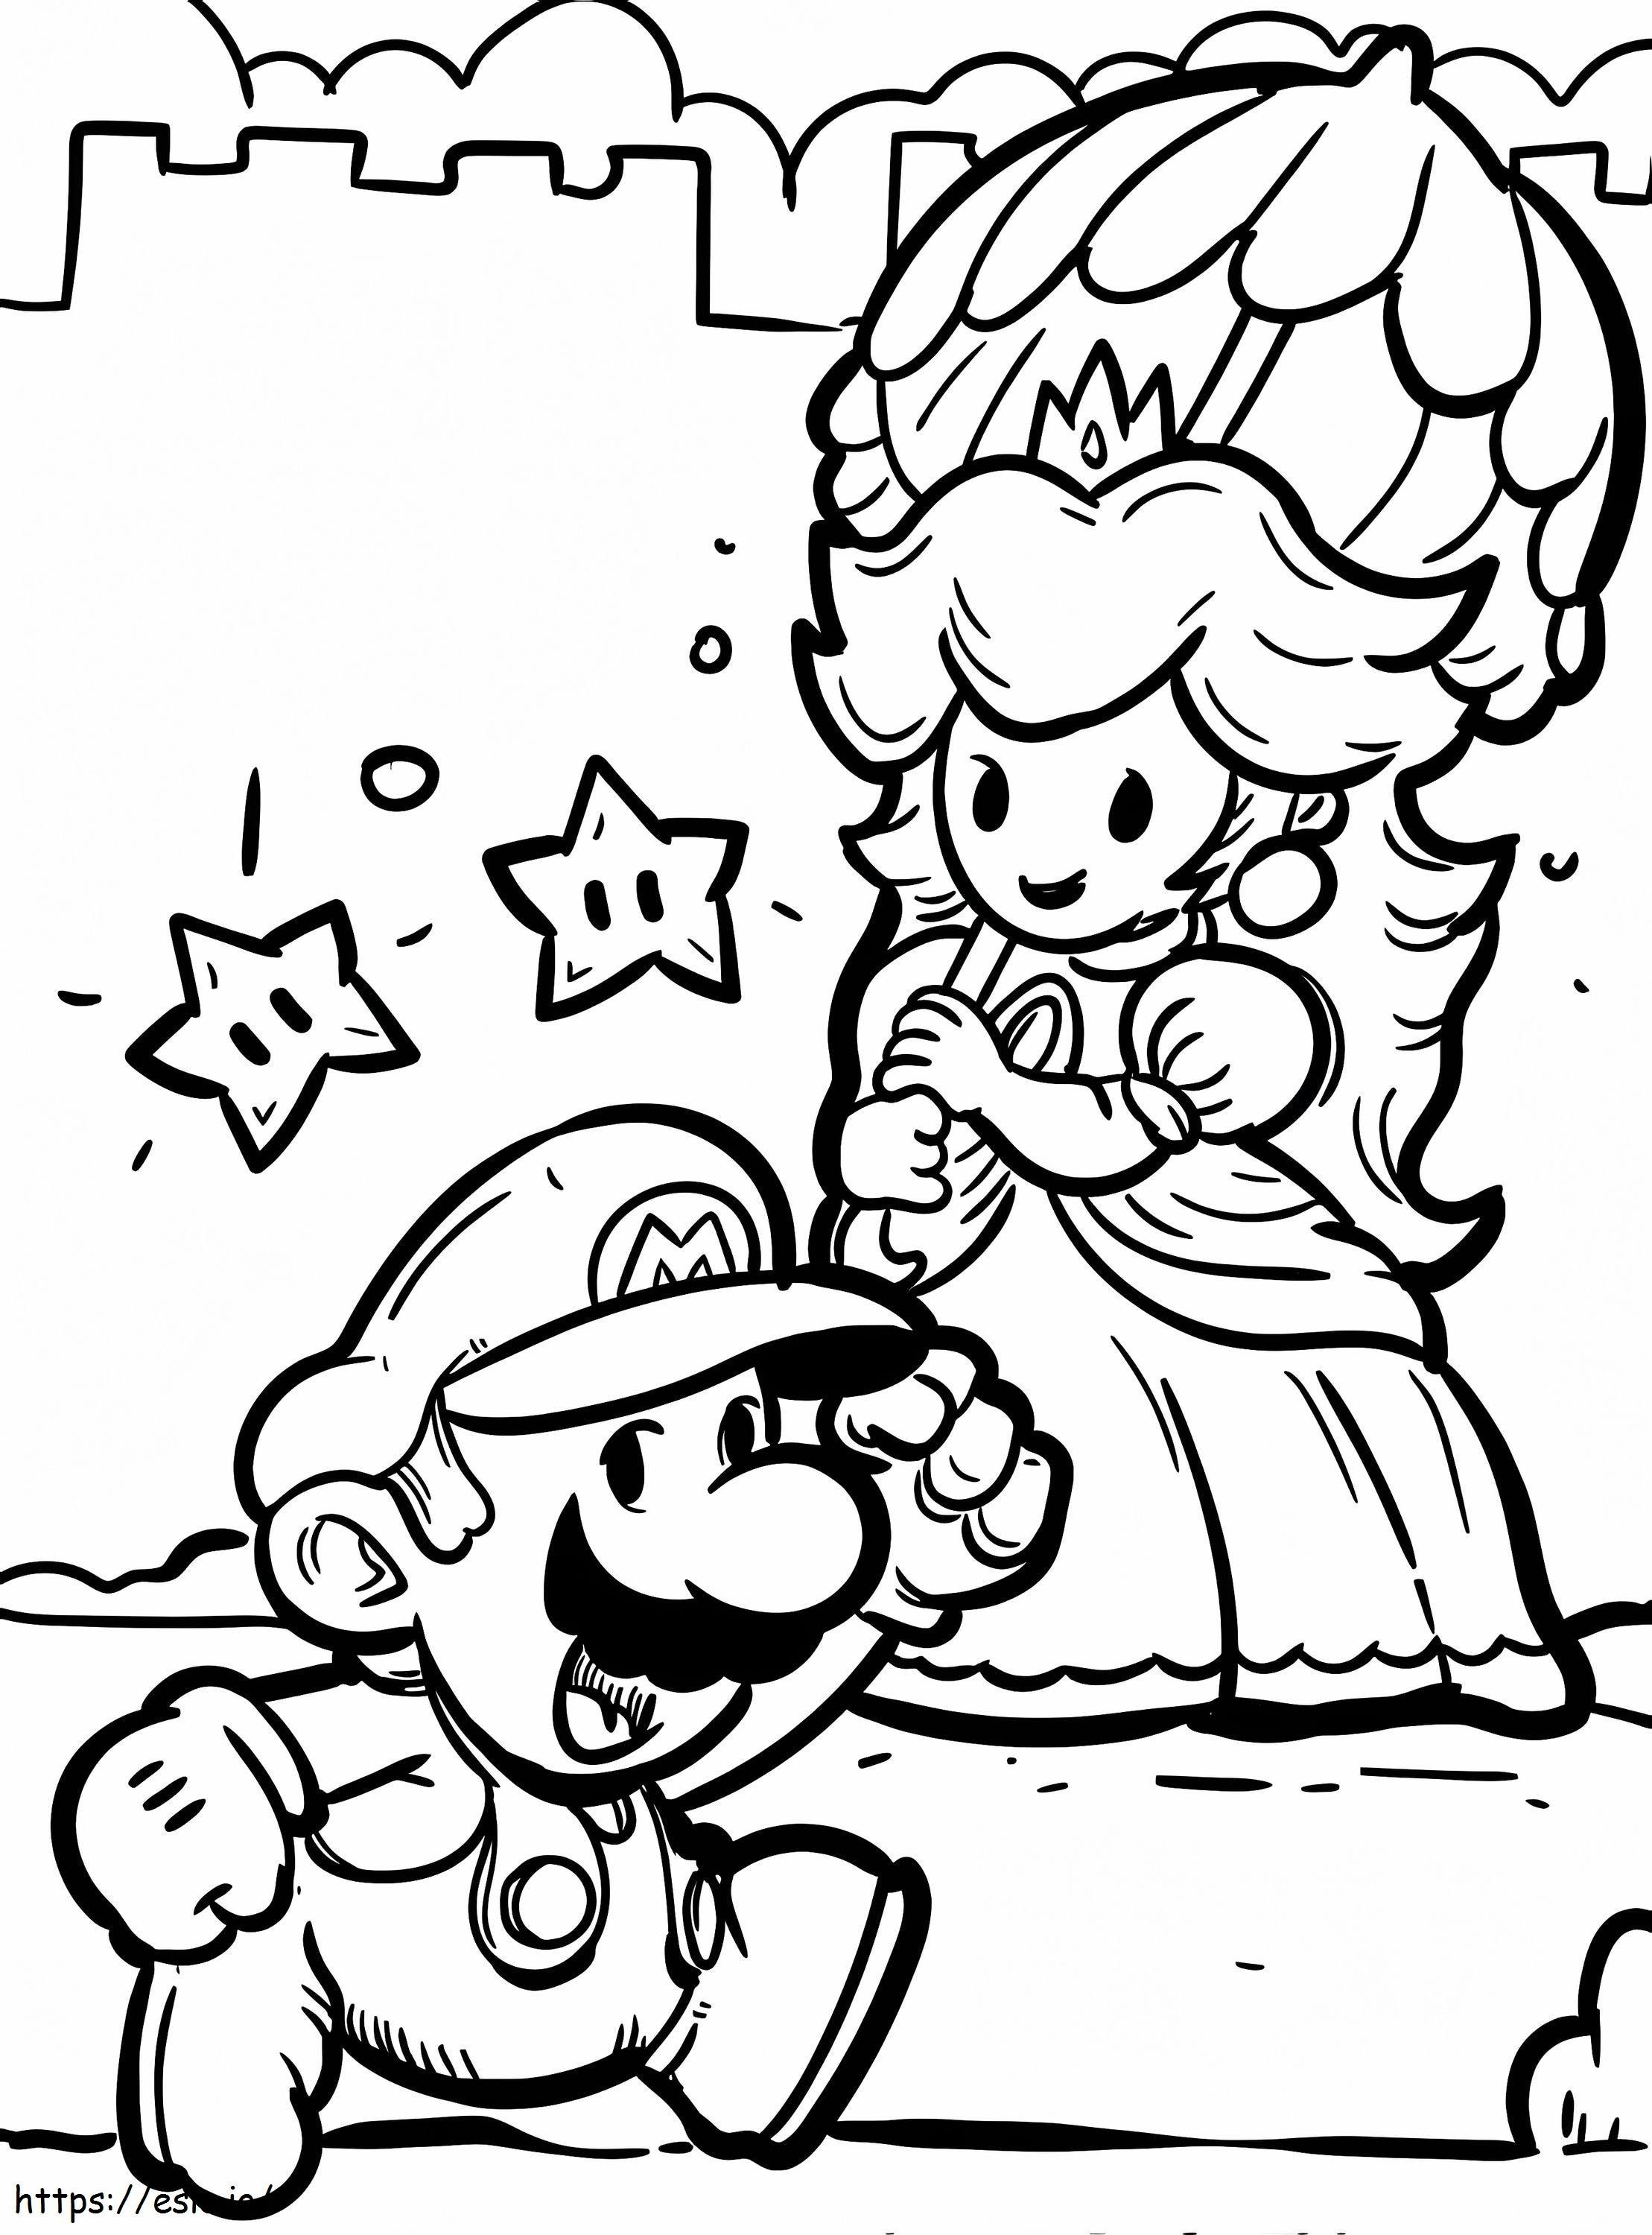 160+ Luigi Coloring Pages FREE Printable 1